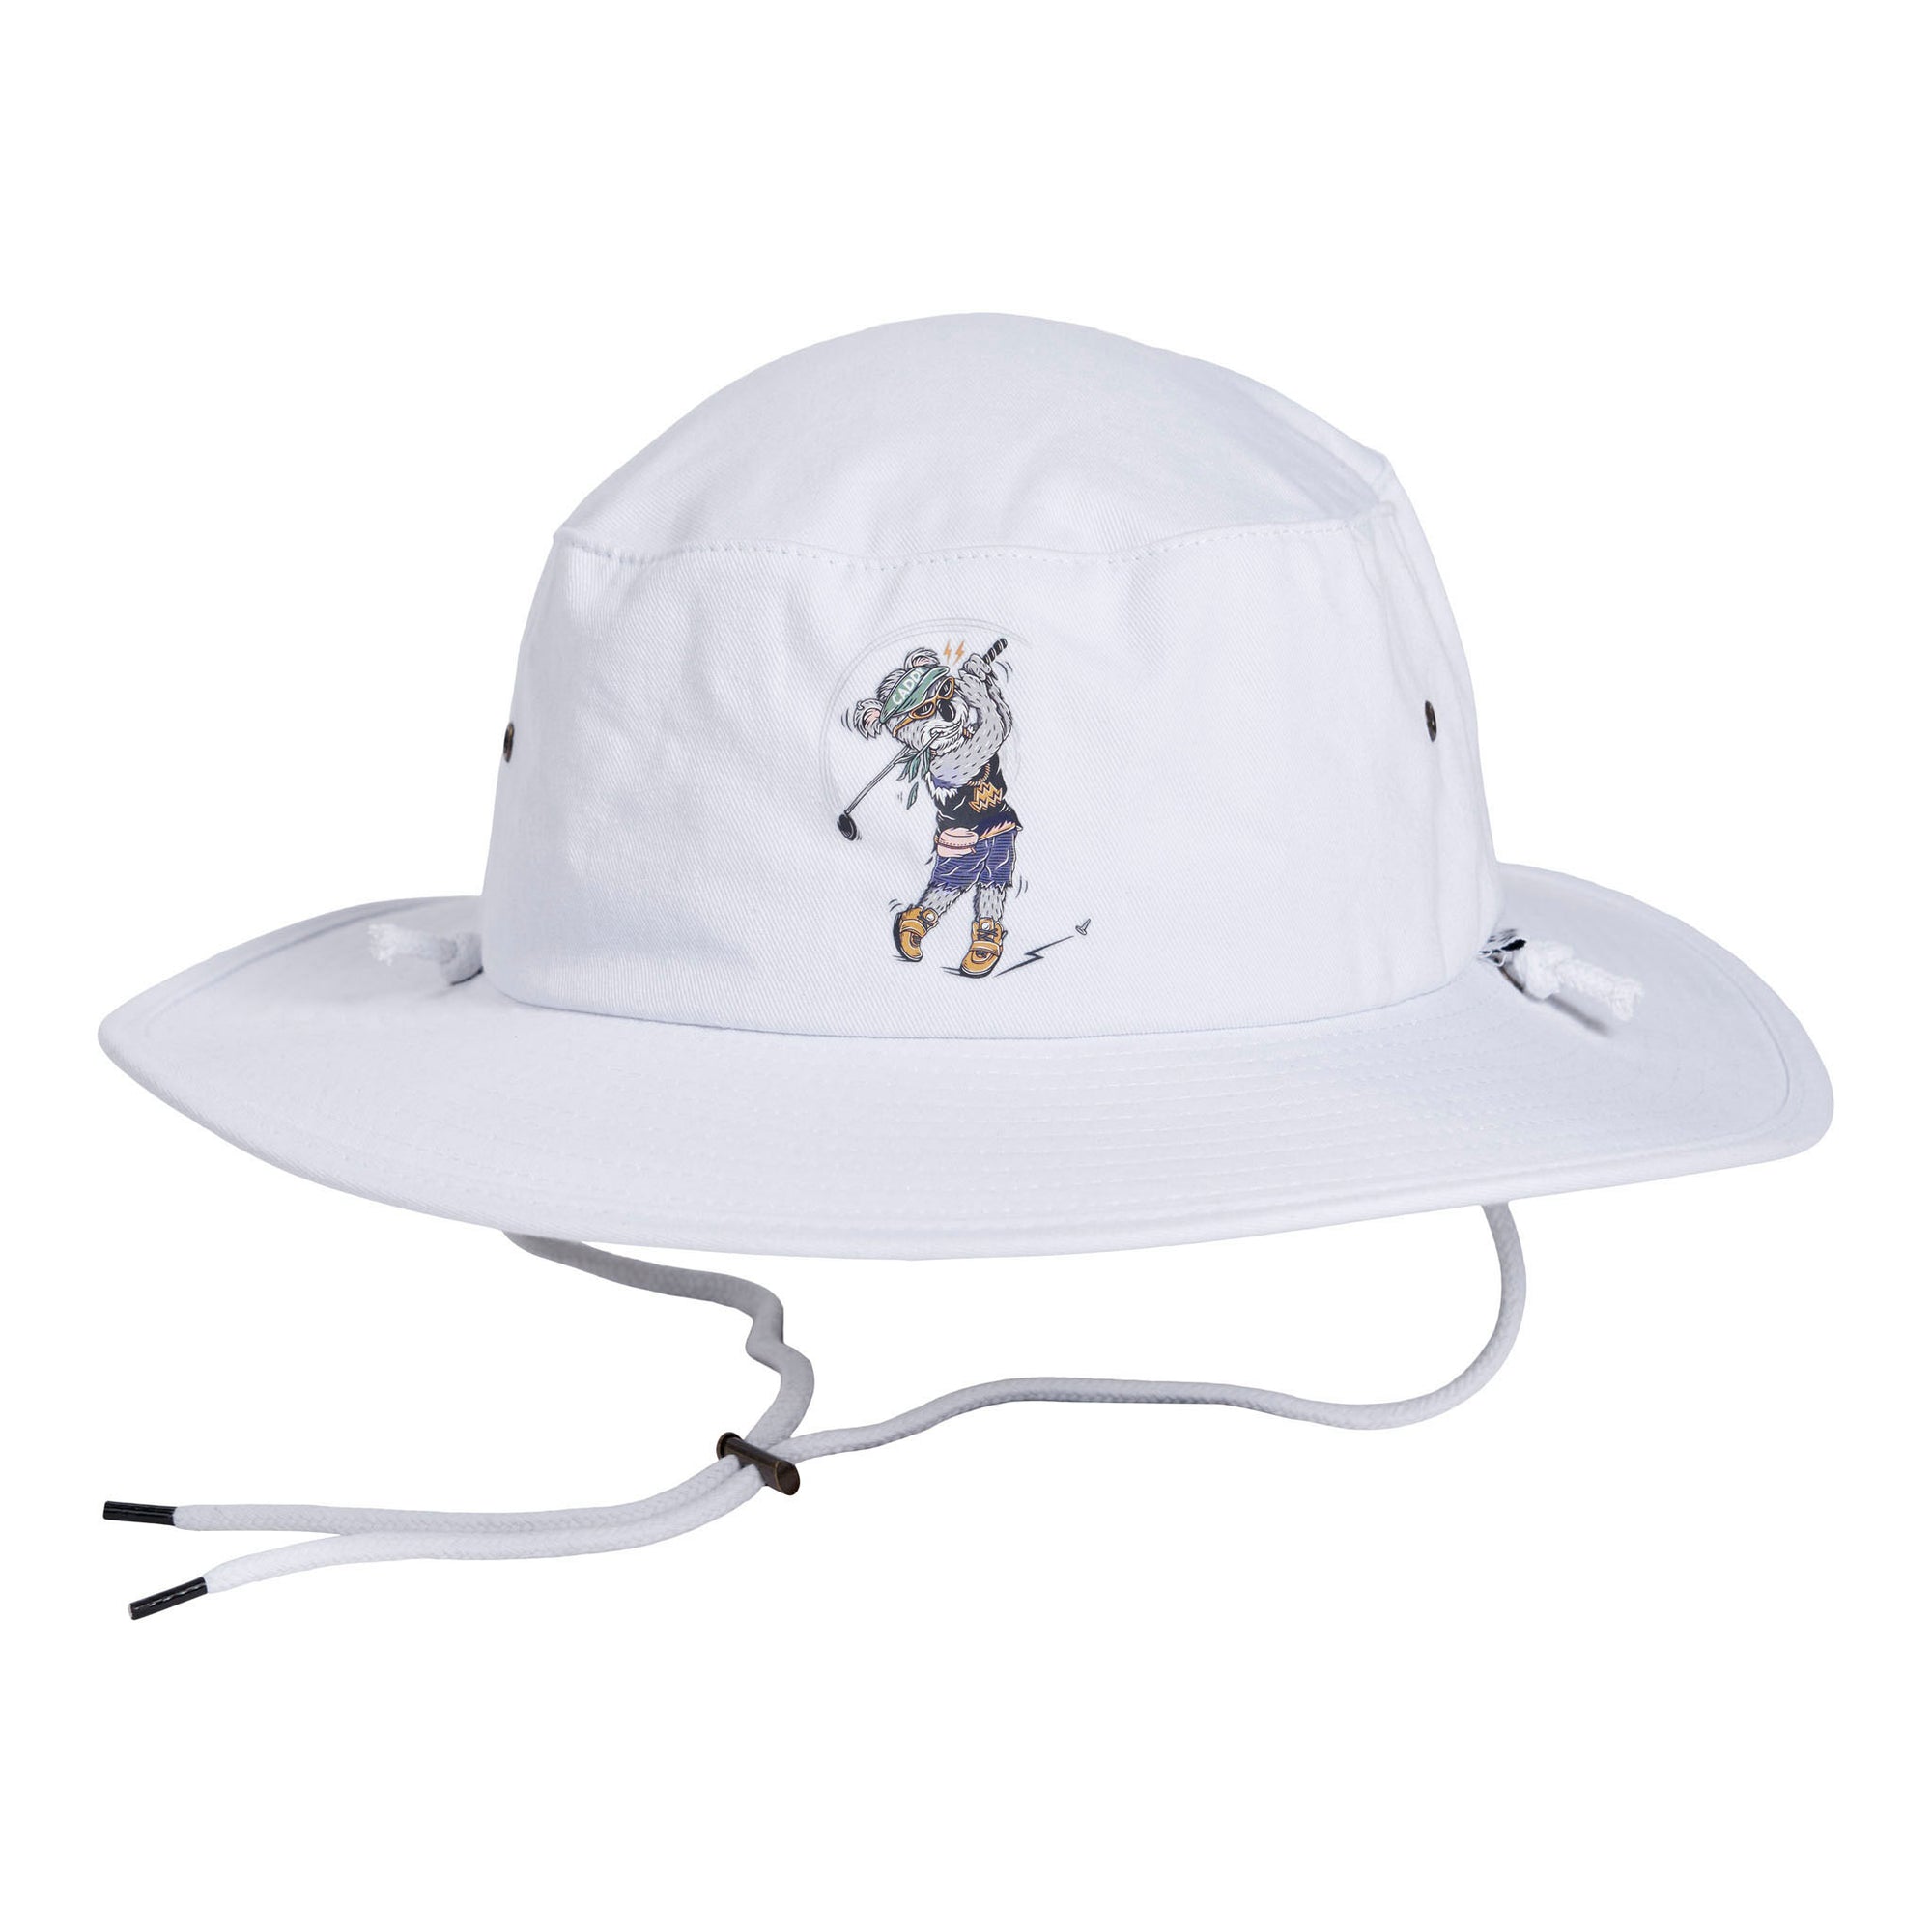 GOAT USA - BUCKET HATS ARE BACK!! Four news styles 🐐🇺🇸